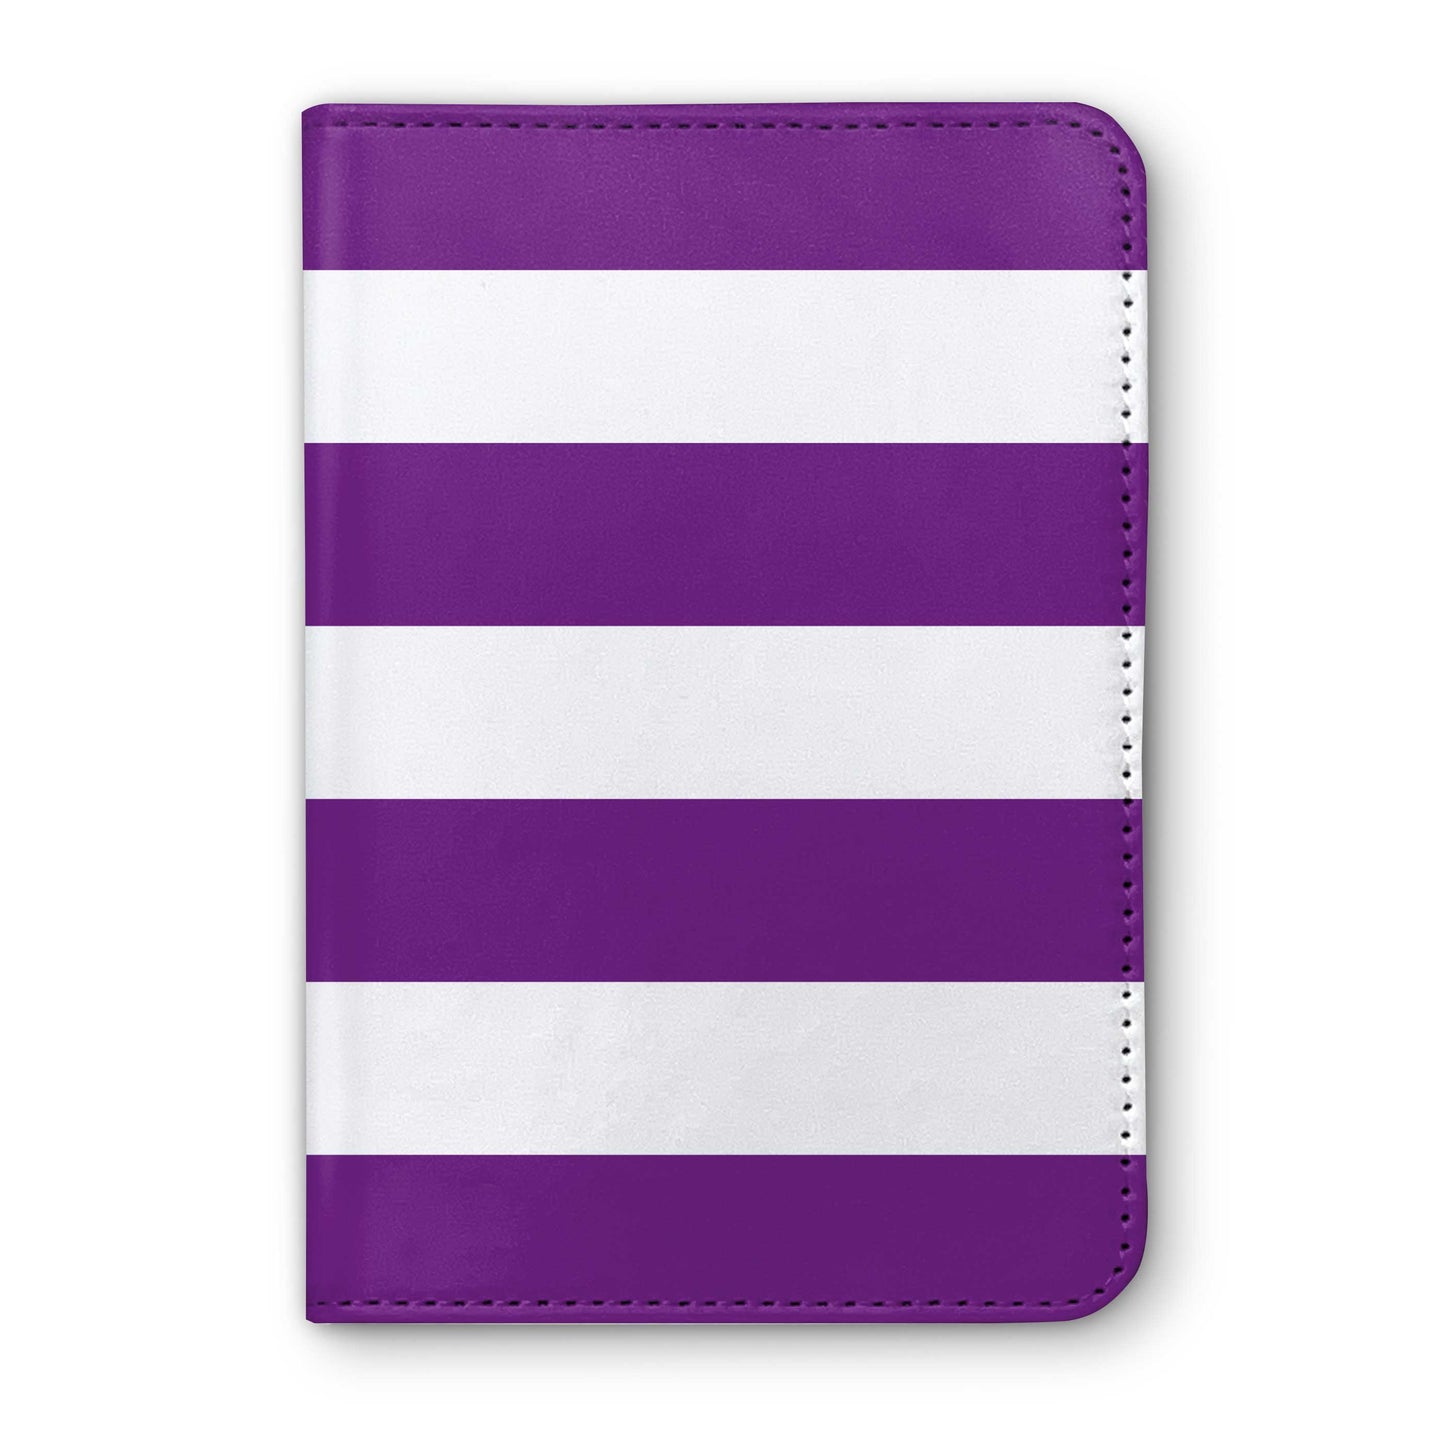 Tam Wallop Horse Racing Passport Holder - Hacked Up Horse Racing Gifts